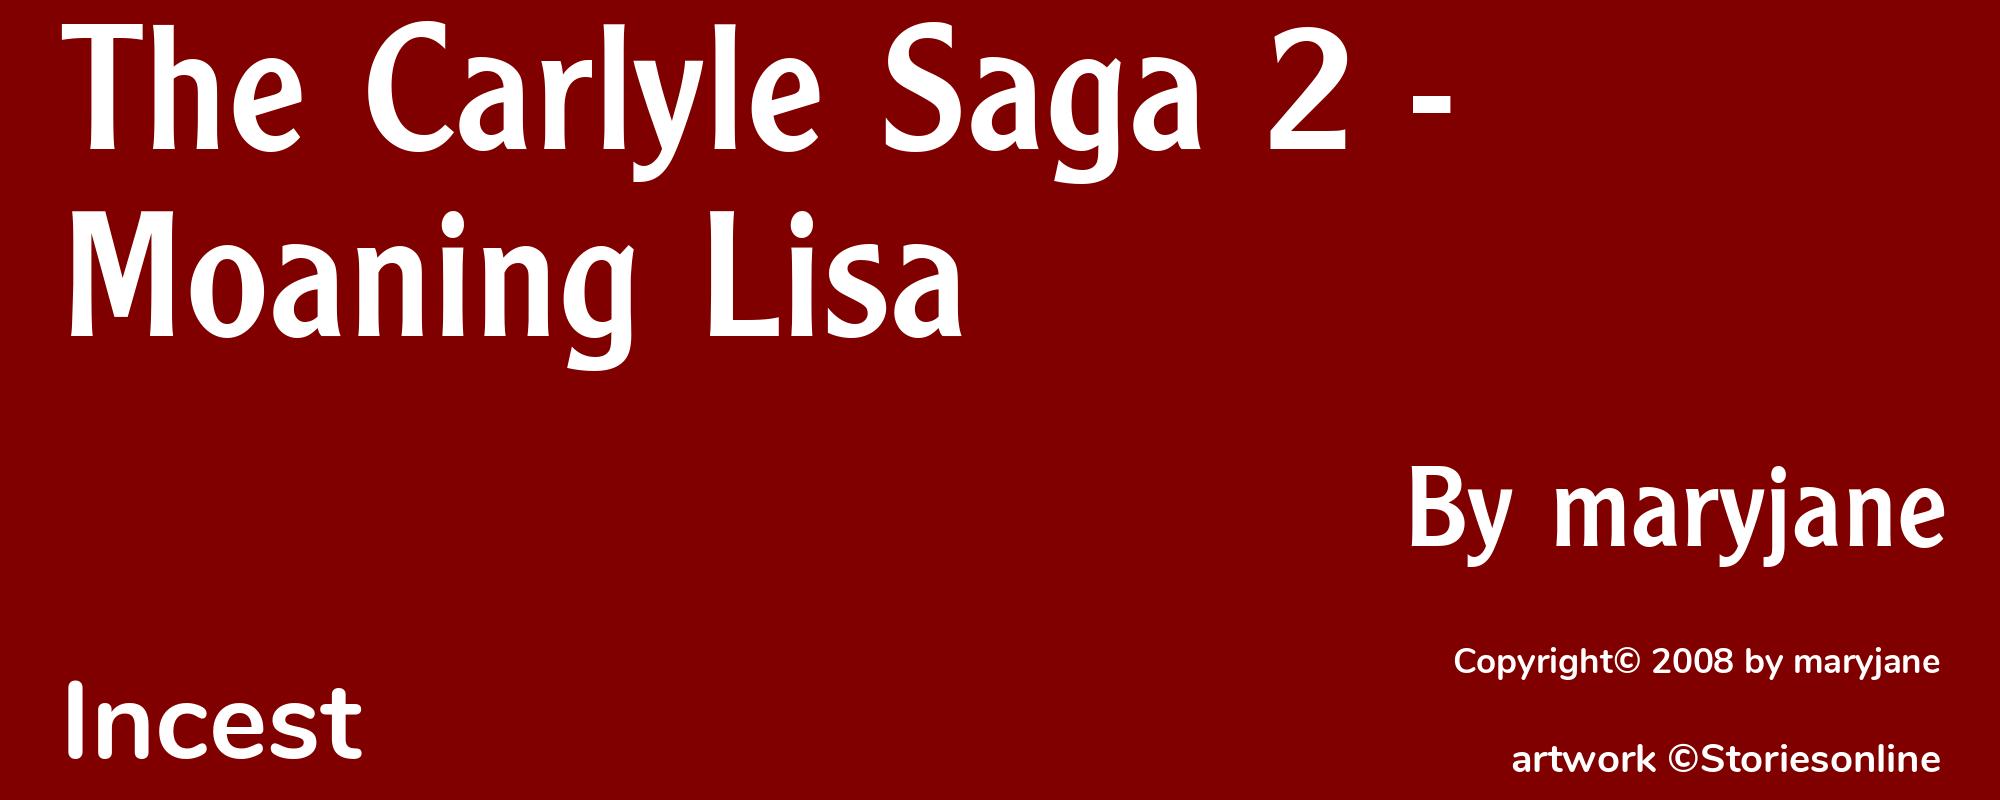 The Carlyle Saga 2 - Moaning Lisa - Cover